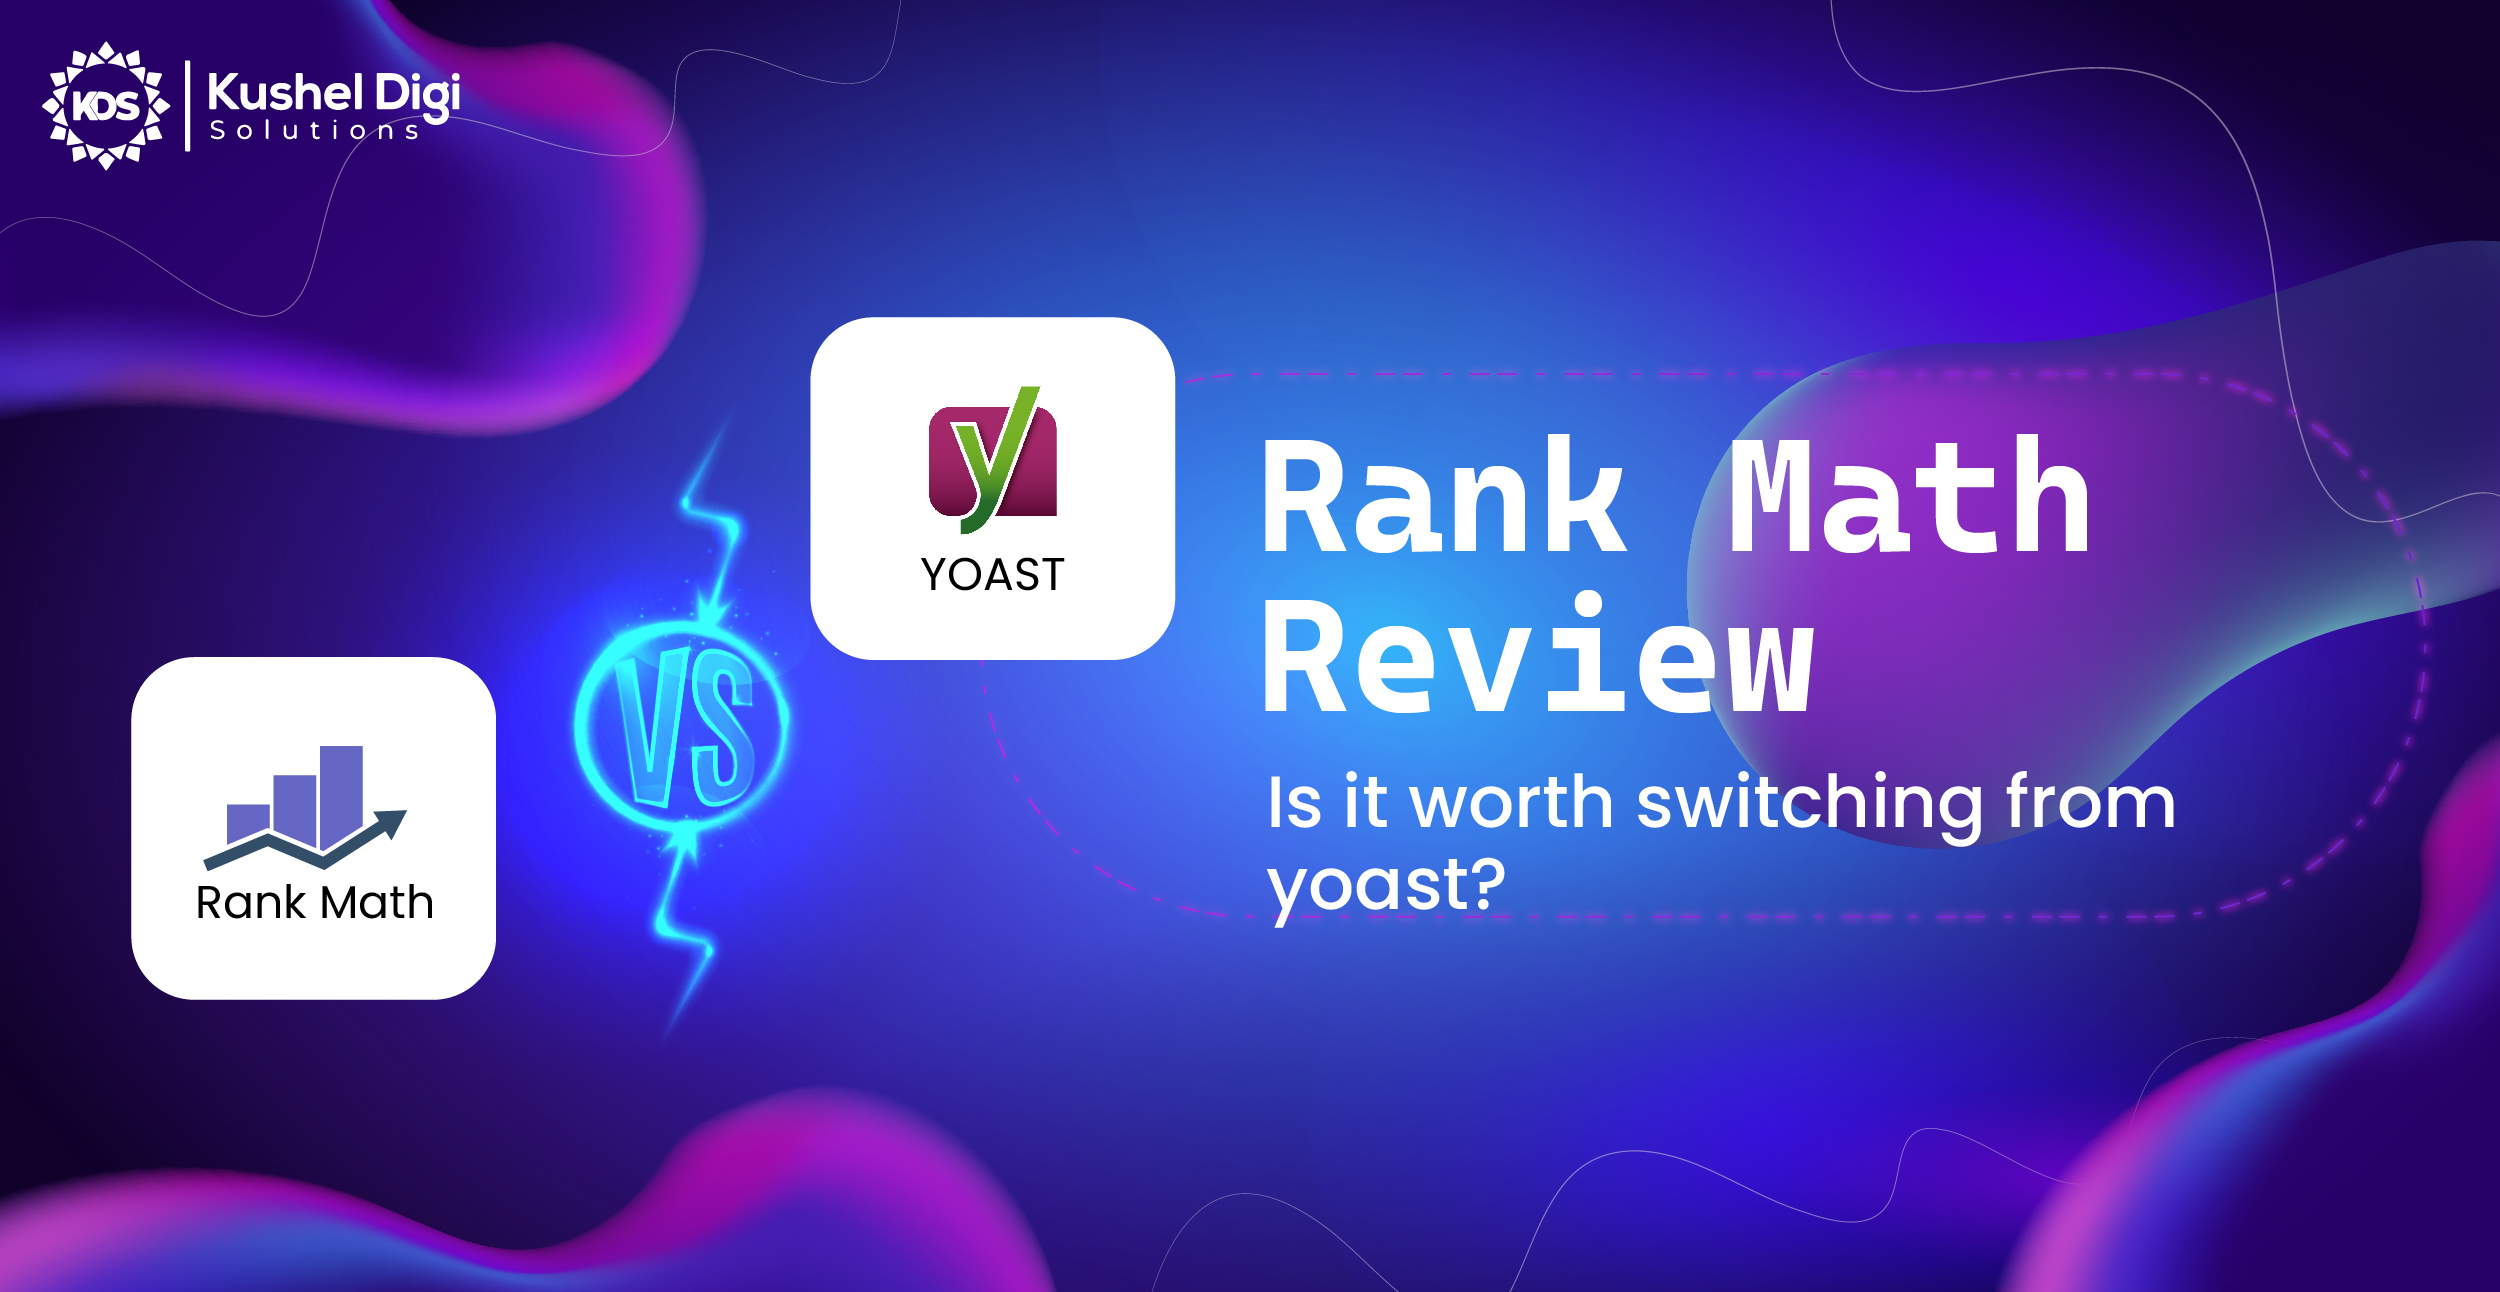 Rank Math Vs. Yoast: Is it time to switch from Yoast?